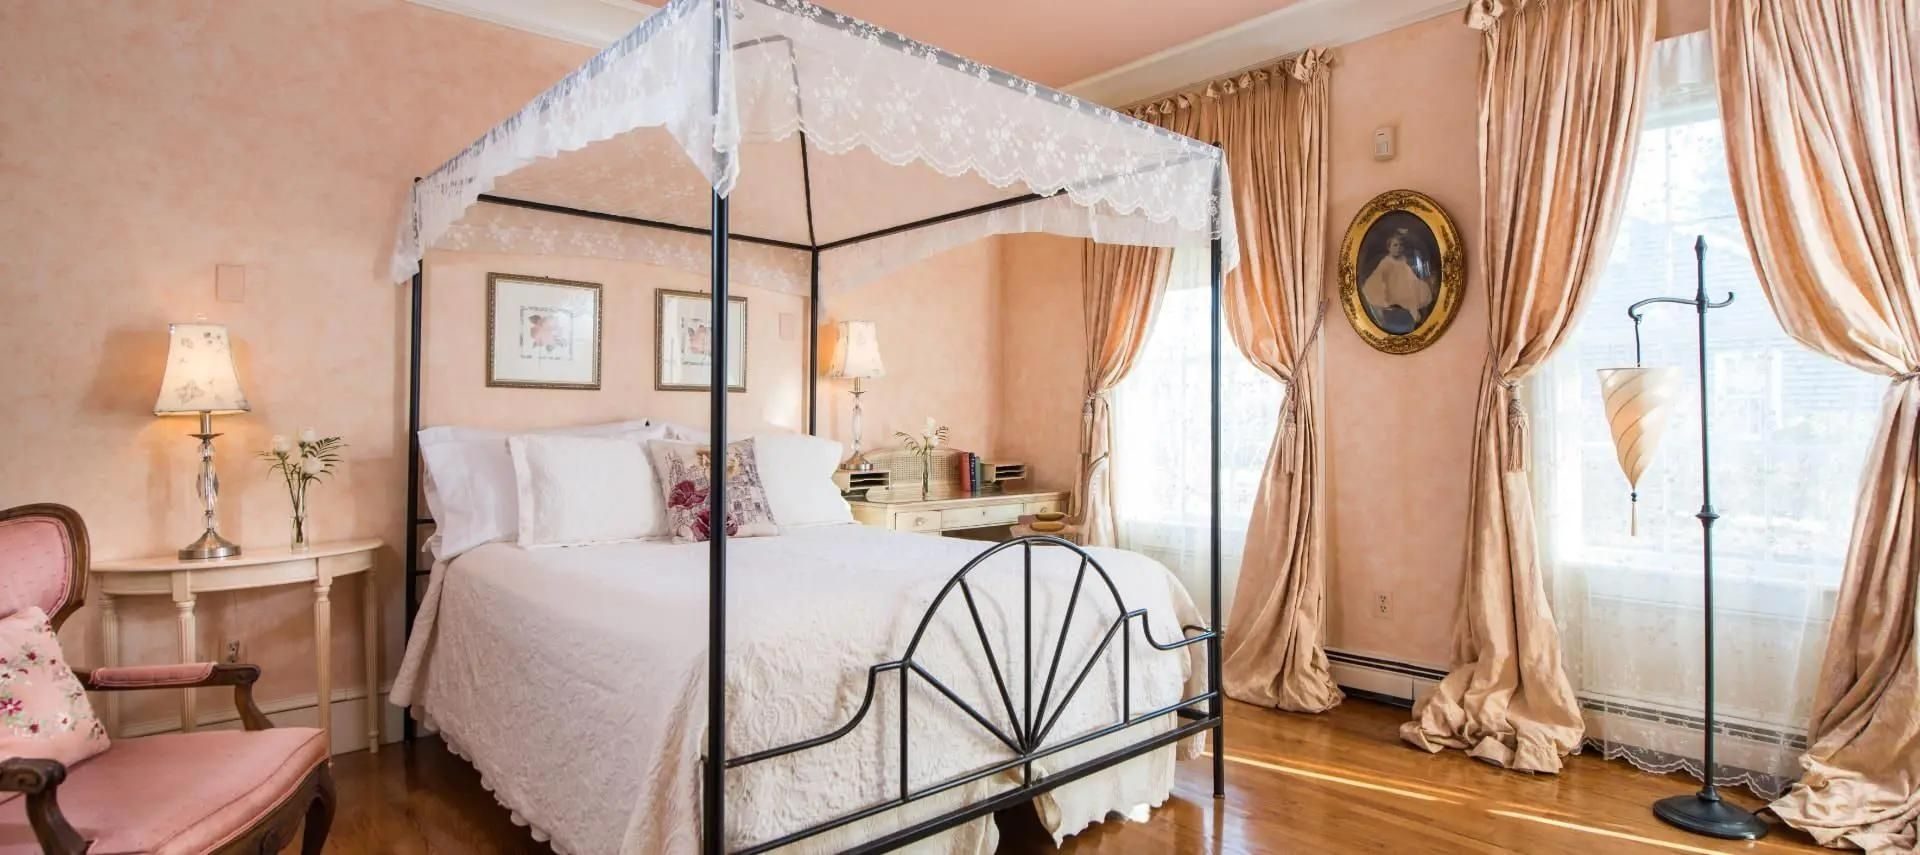 Stunning guest suite in cream and peach with canopy bed and luxurious drapes